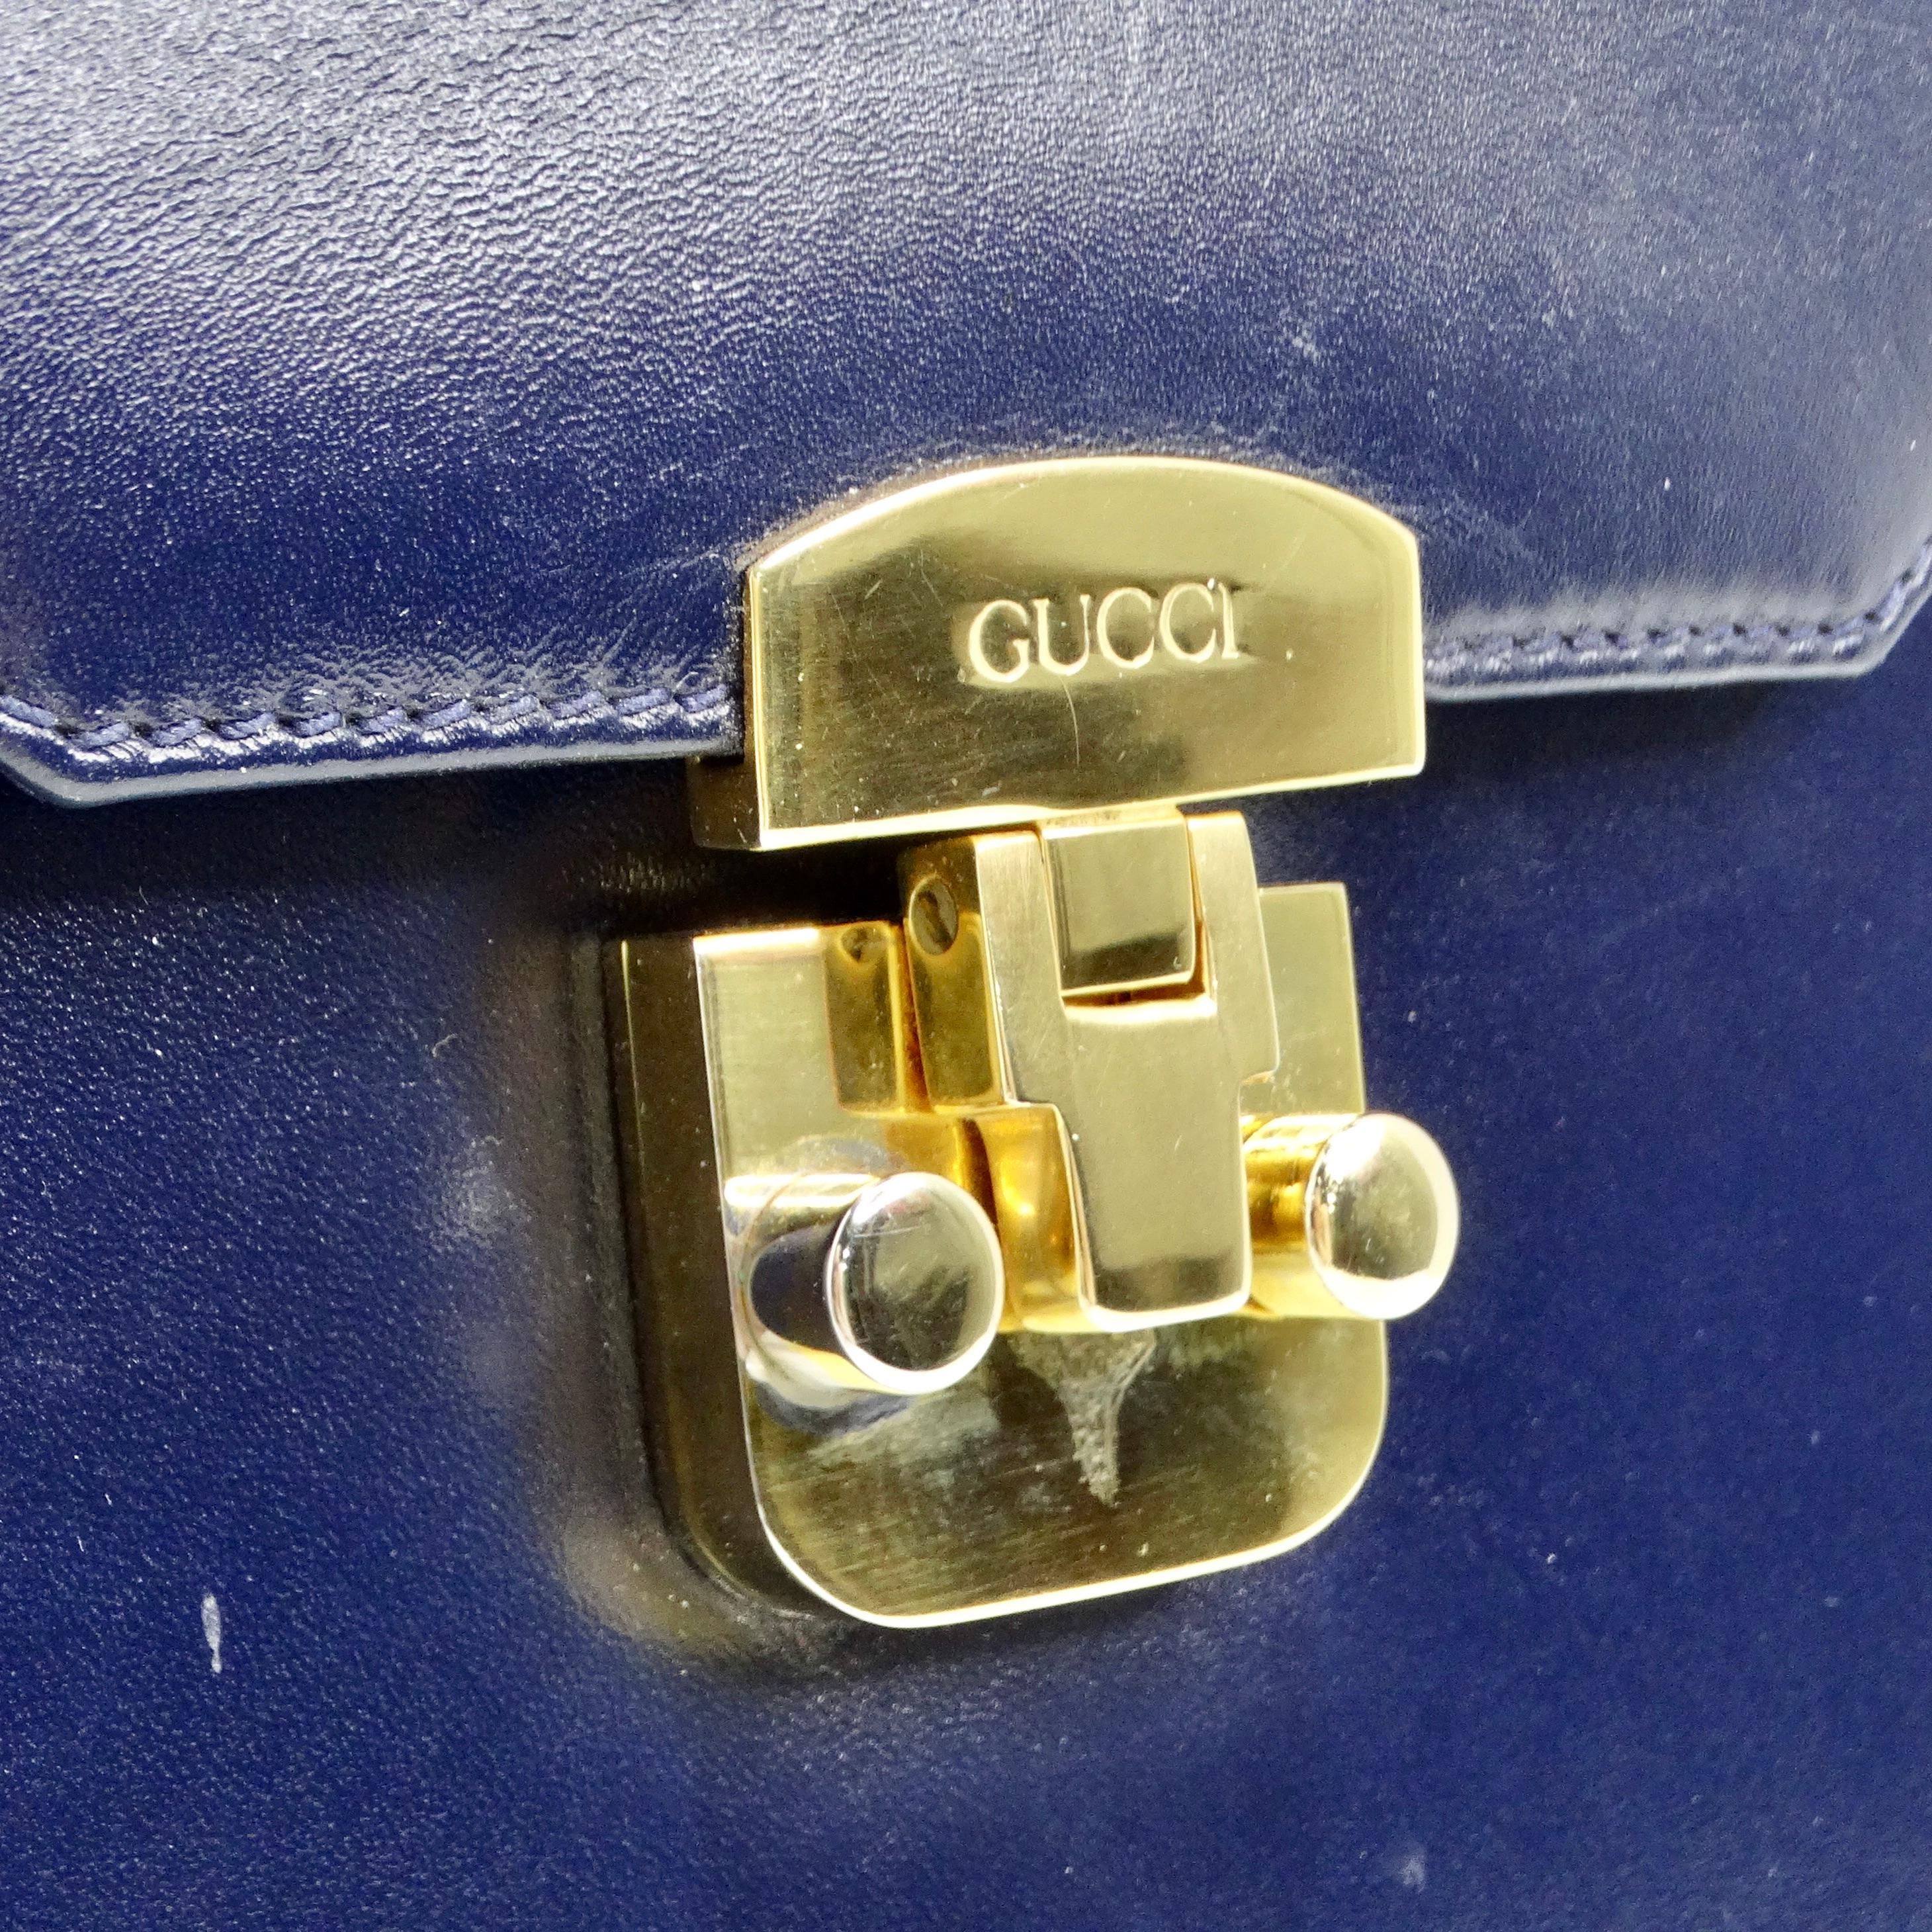 The Gucci 1980s Lady Lock Navy Leather Handbag is a stunning and elegant accessory that exudes sophistication and timeless style. Crafted from navy blue leather, this structured handbag features a classic top handle design that adds a touch of